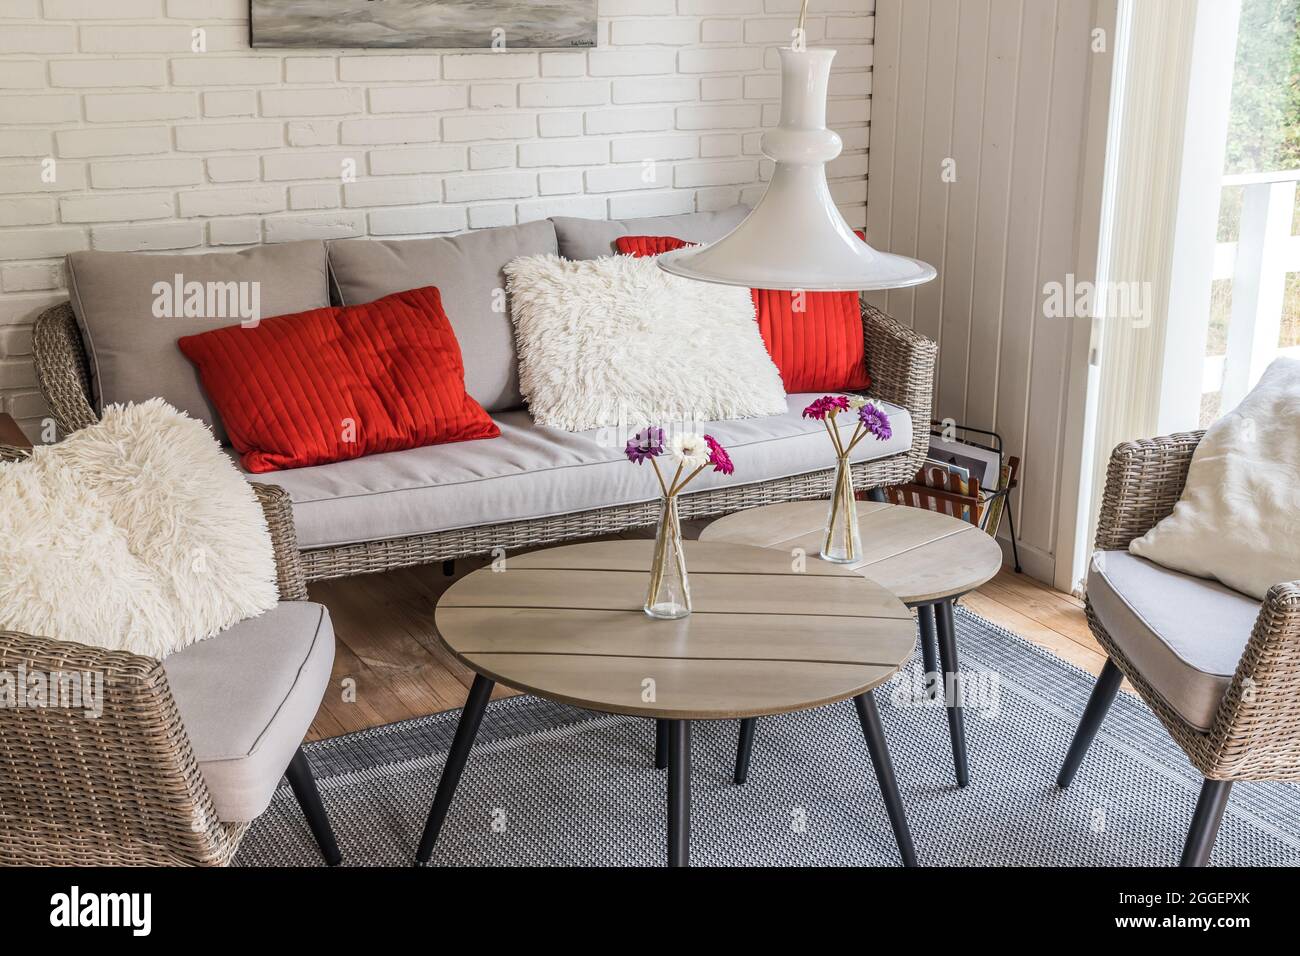 Rattan sofa with two armchairs and cozy red and white pillows, white stone wall behind, scandinavian style. Stock Photo